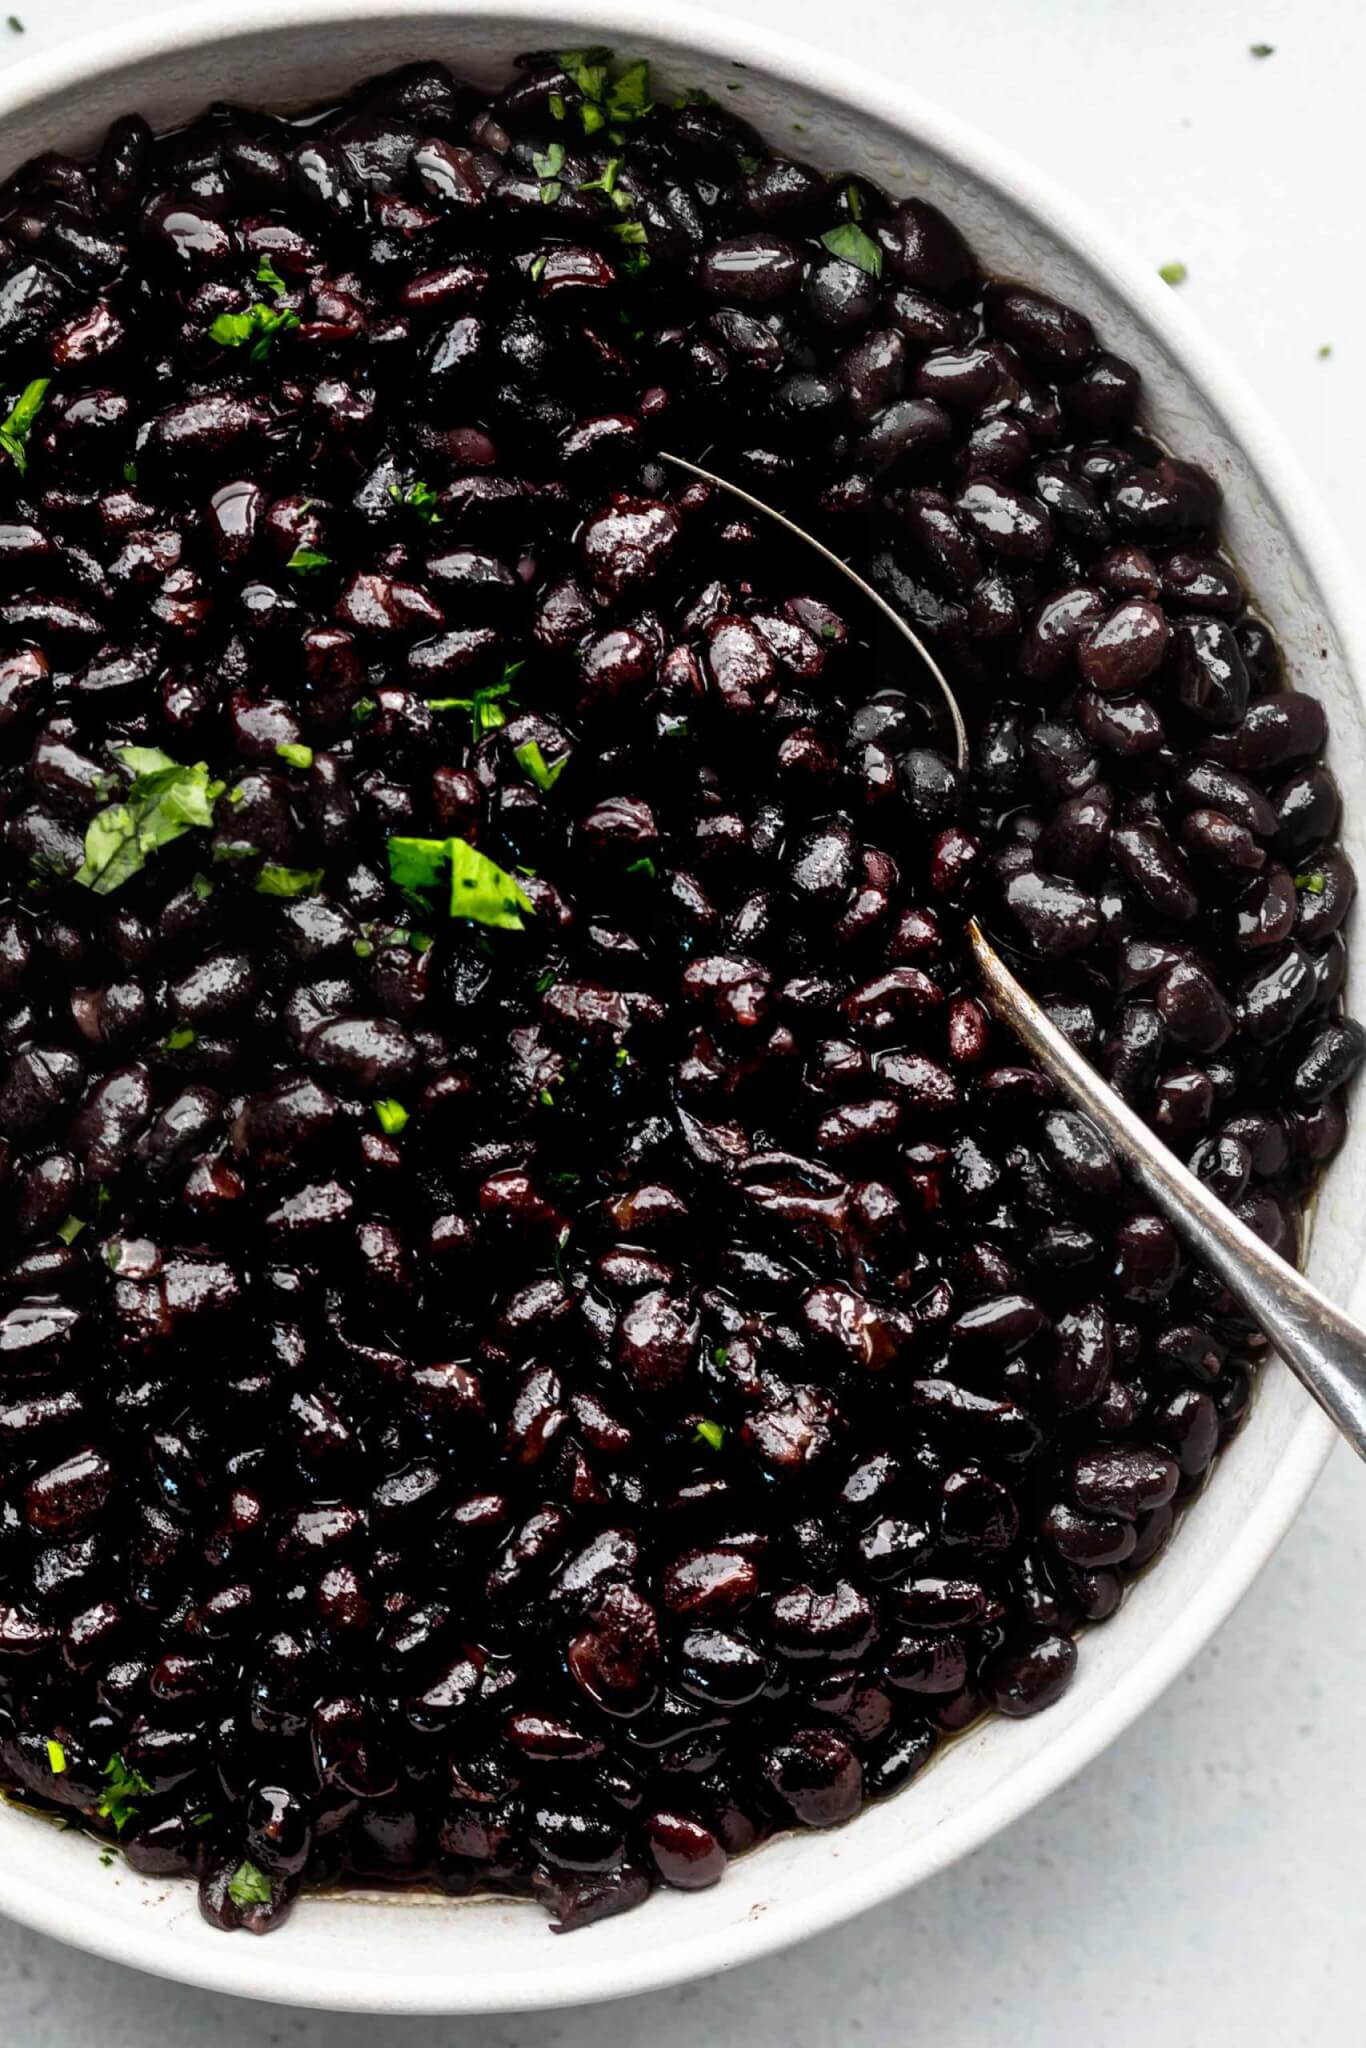 Top shot of black beans in large white bowl with spoon